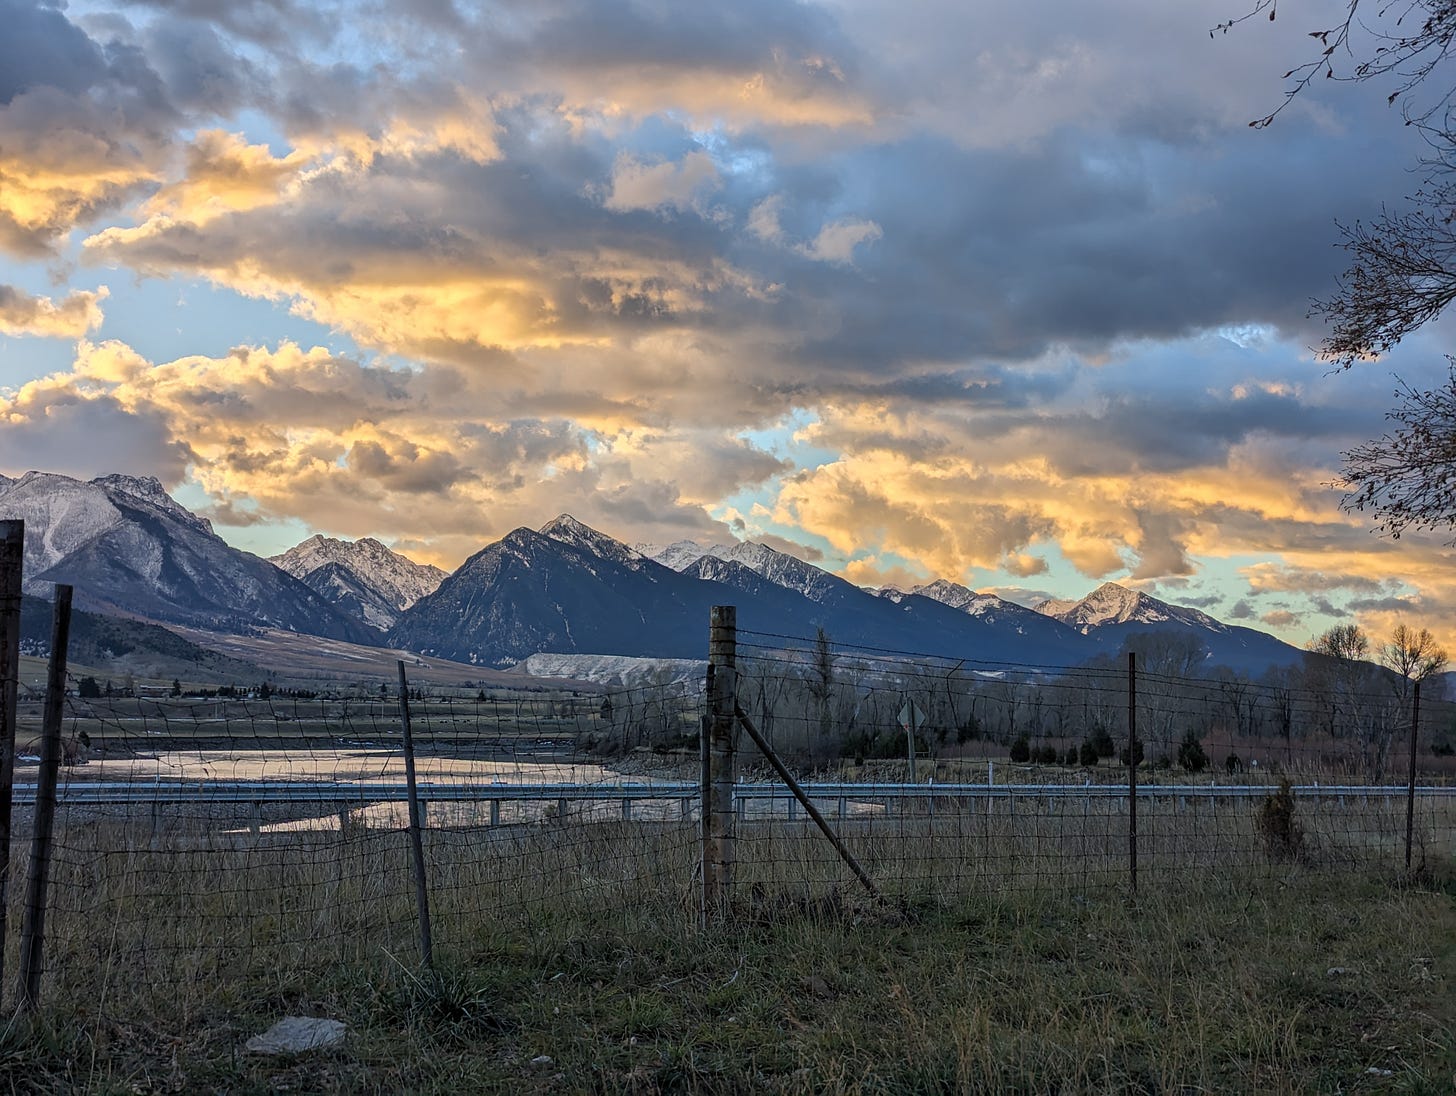 Early winter sunrise lights up clouds over the Absaroka range, Yellowstone River foreground